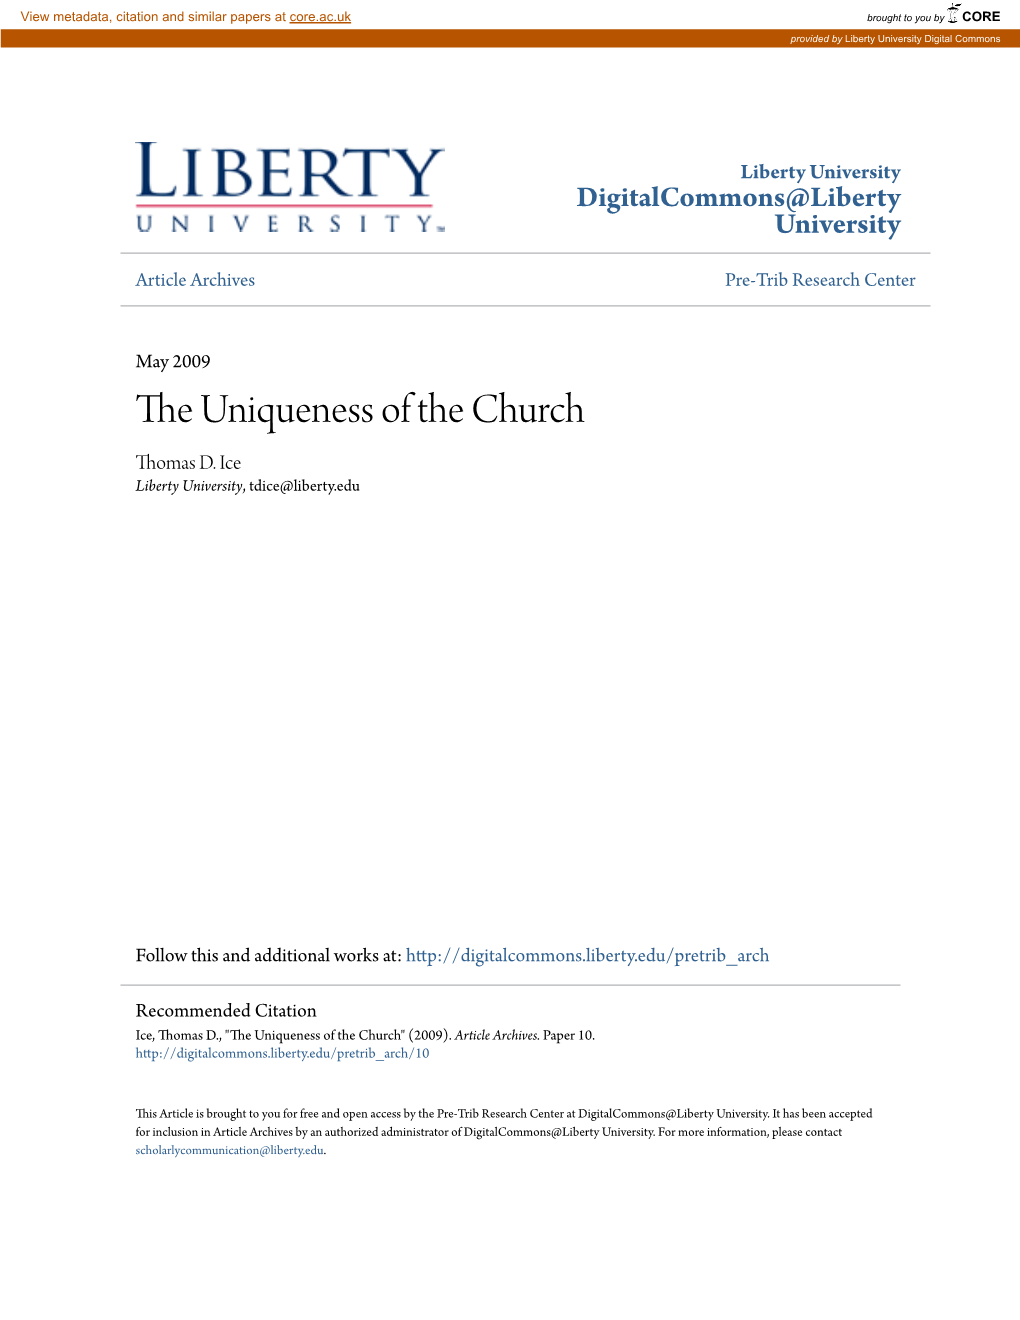 THE UNIQUENESS of the CHURCH Tom's Perspectives by Thomas Ice